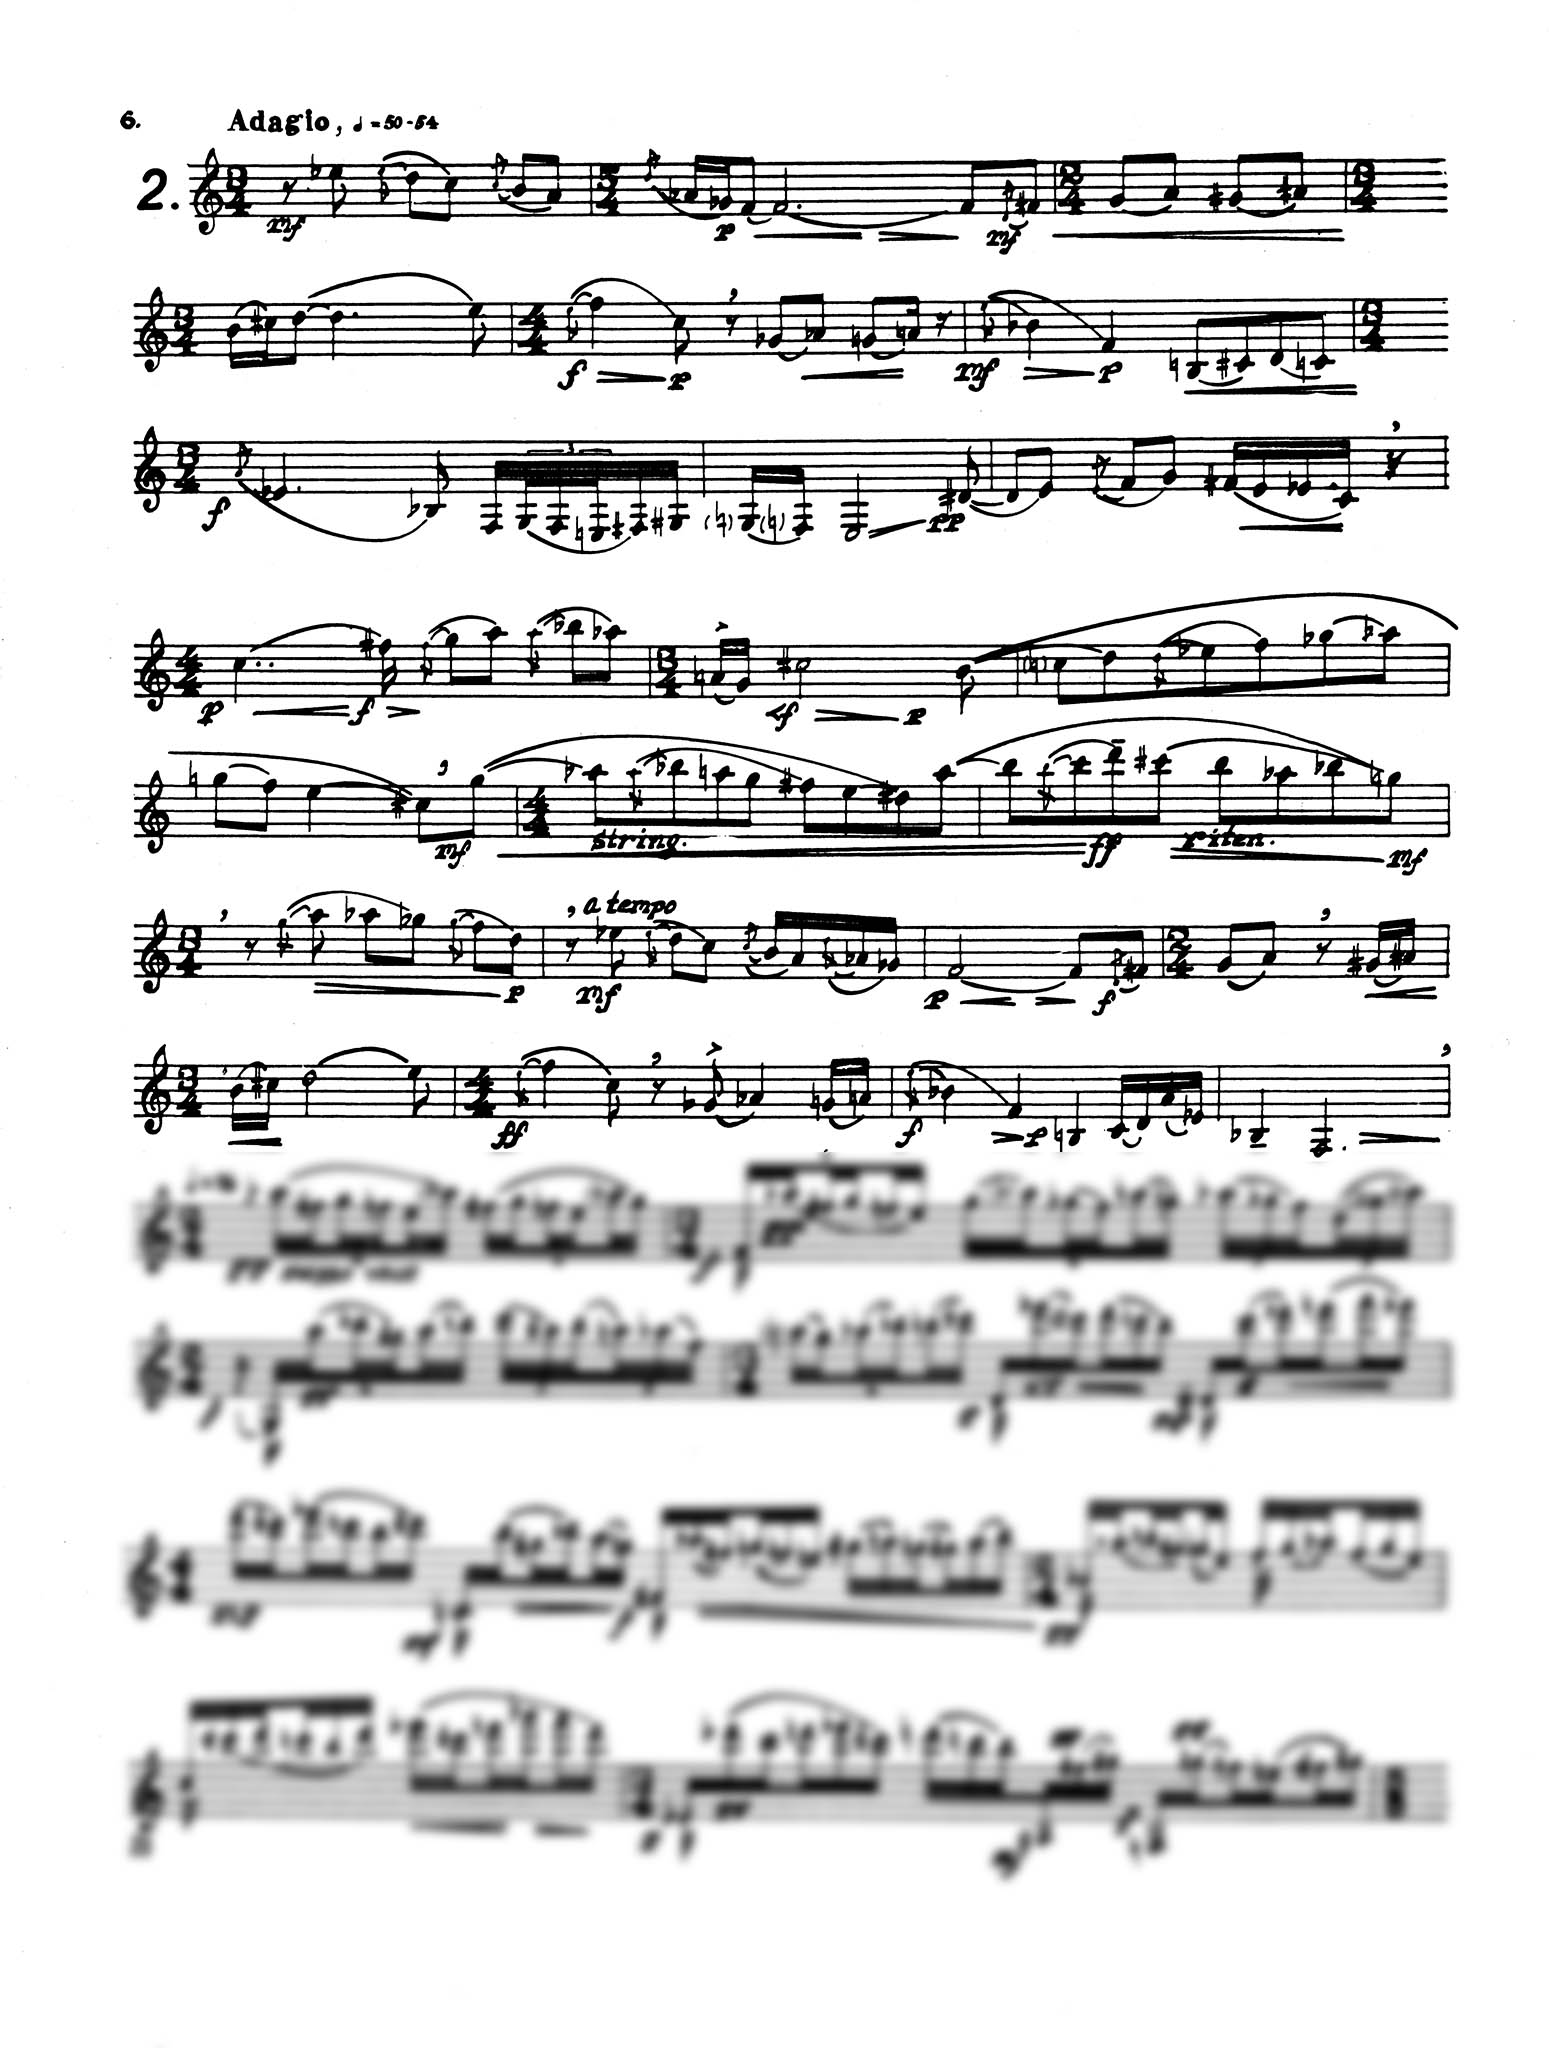 A Set for Clarinet - Movement 2